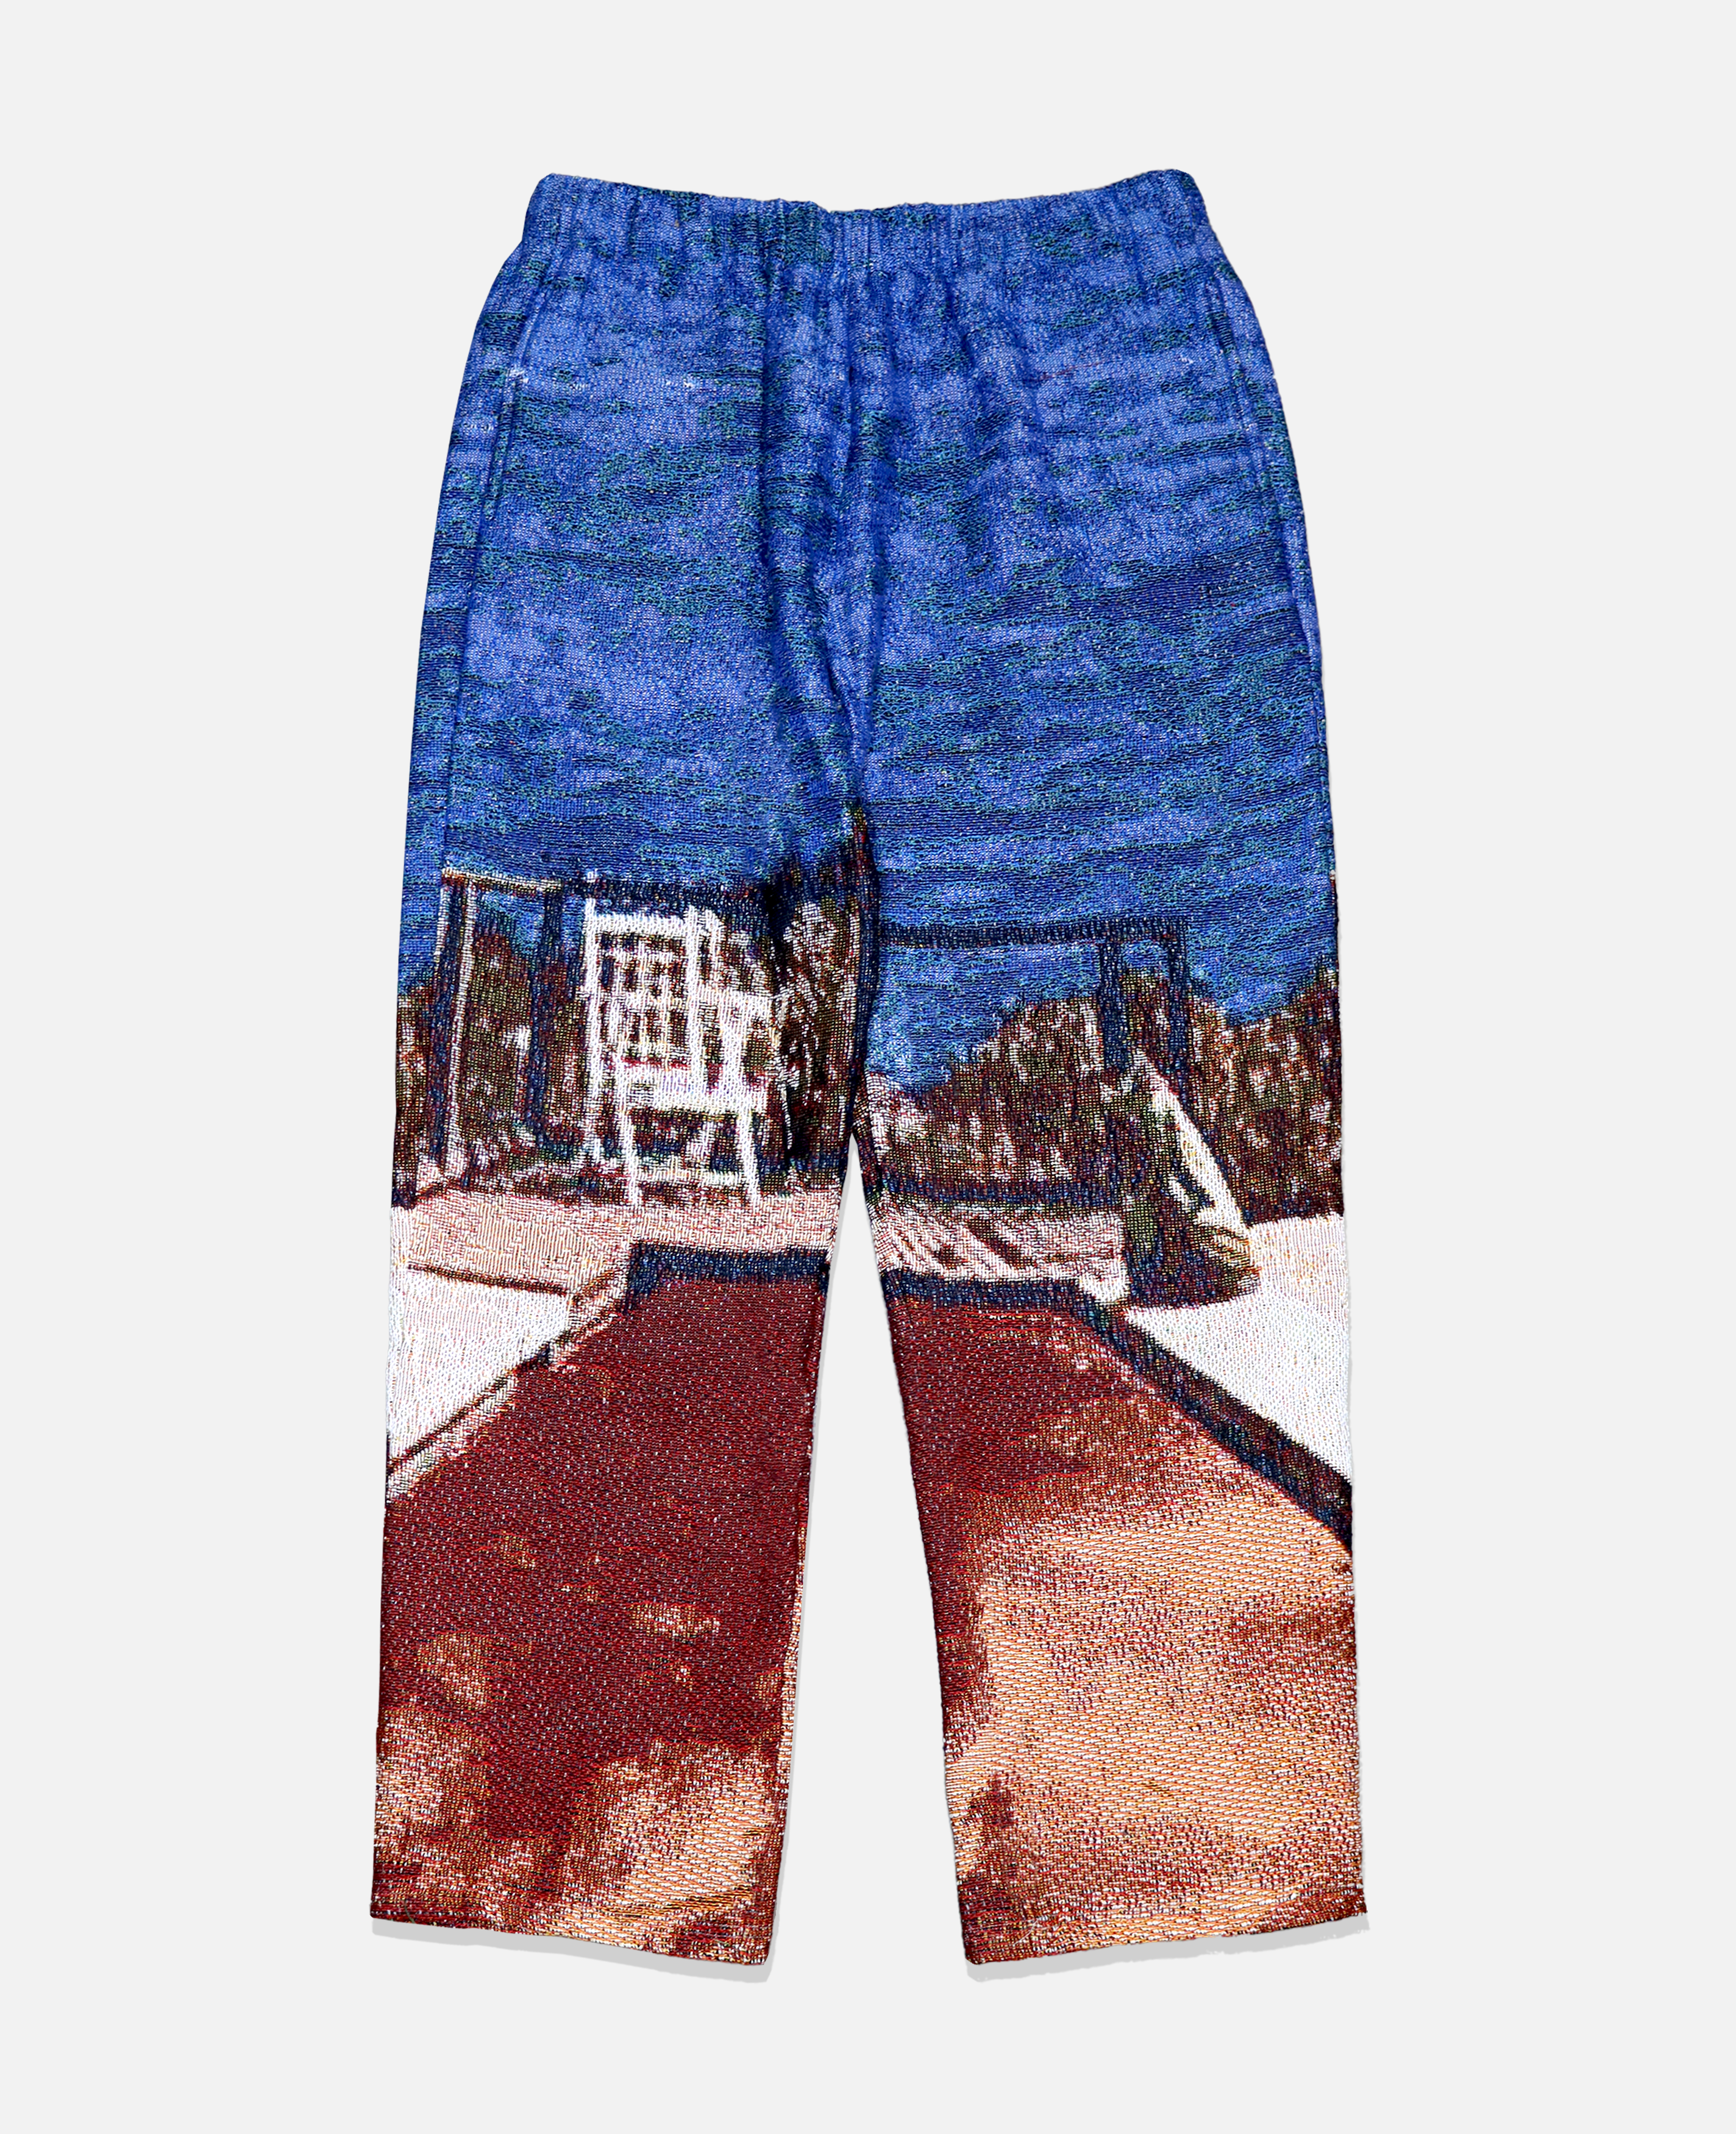 CHILI PEPPERS TAPESTRY SWEATPANTS